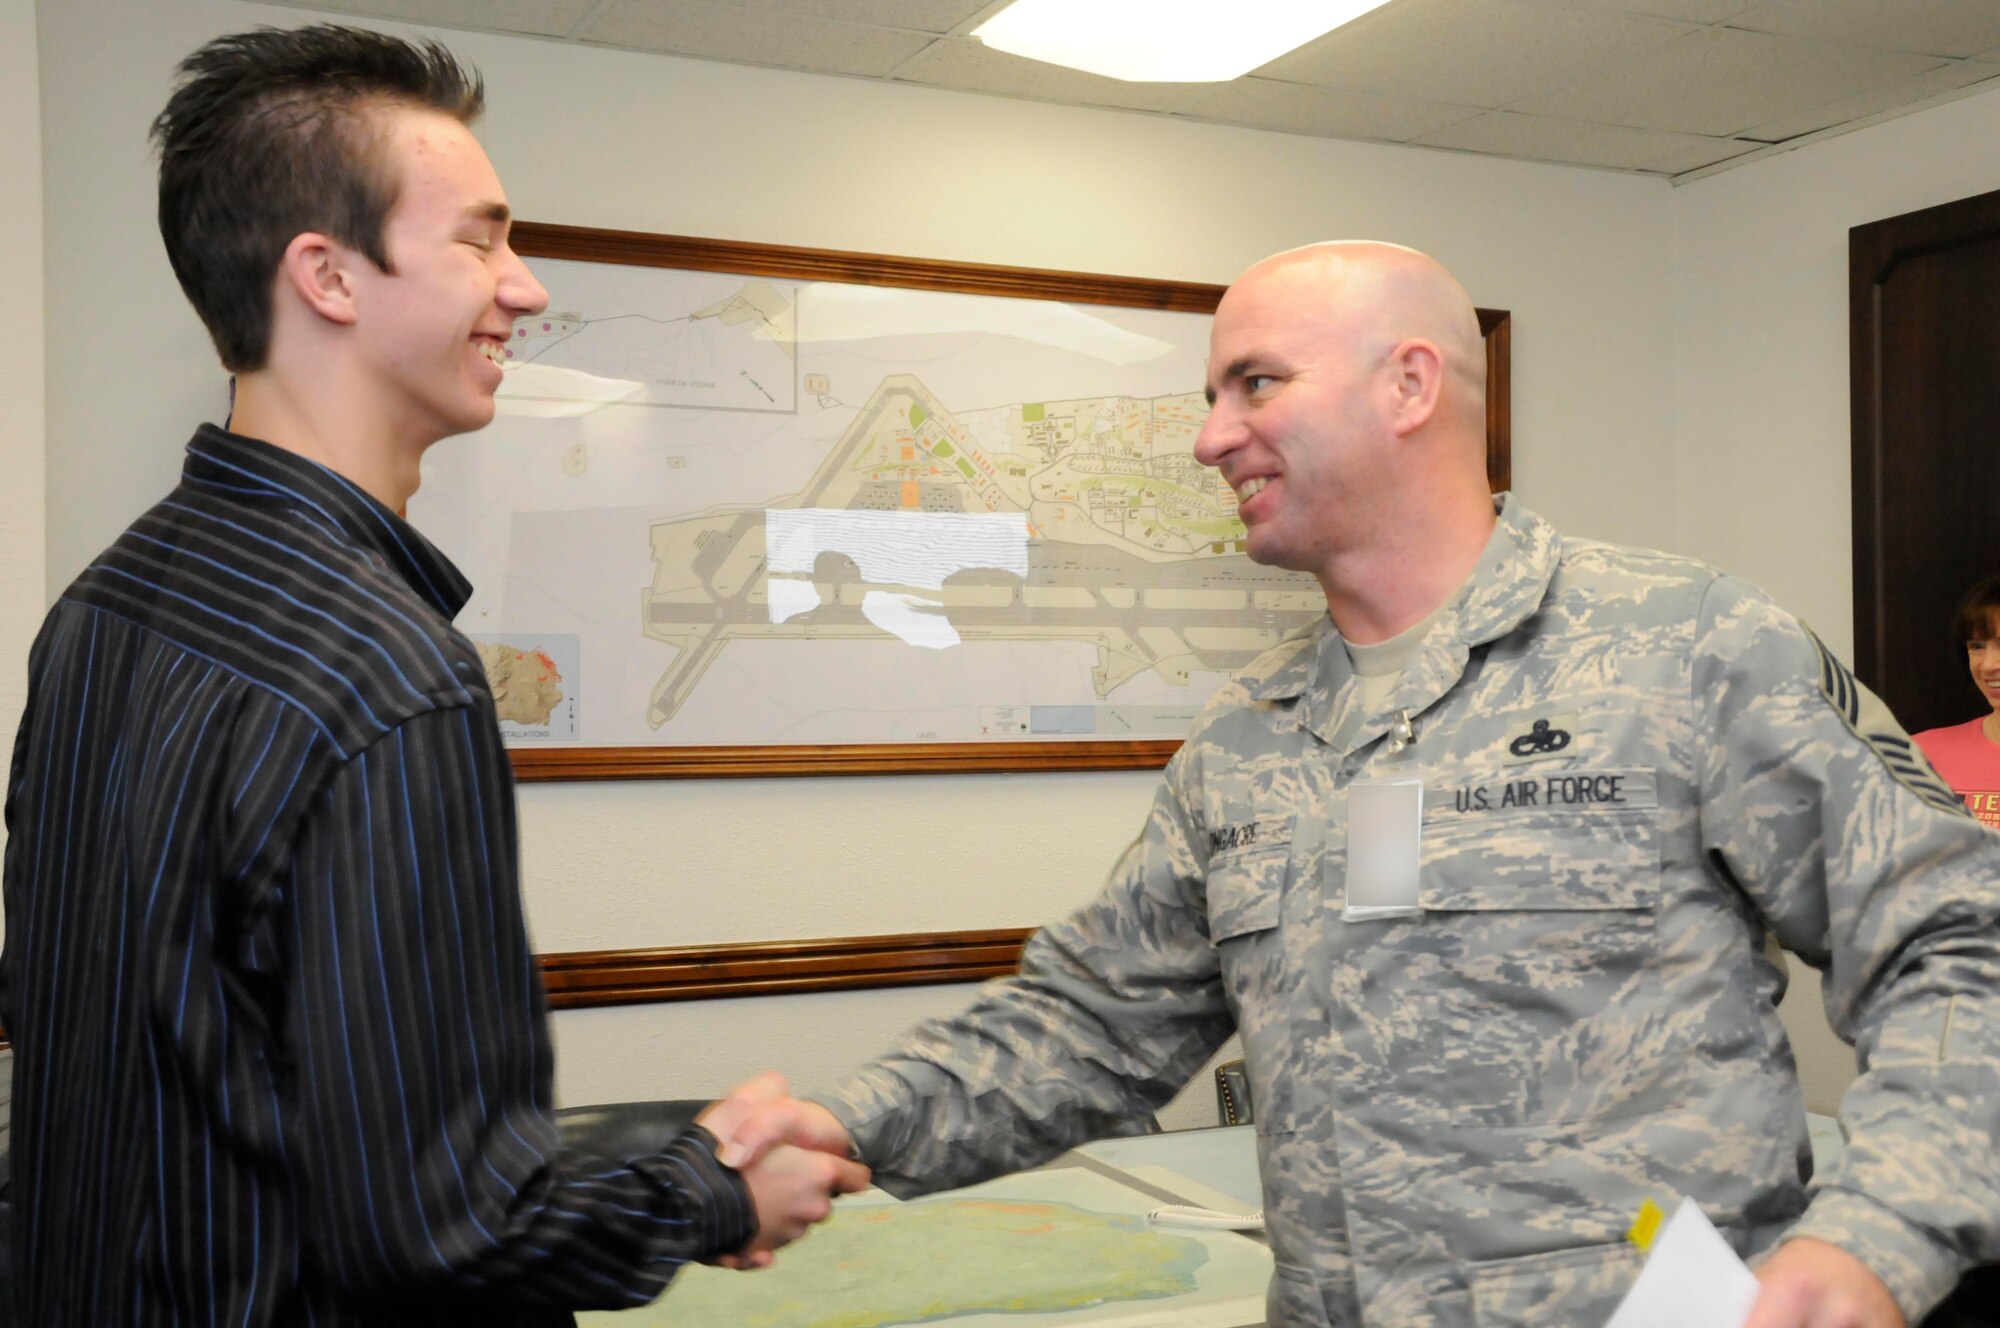 Chief Master Sgt. Kenneth Longacre, 65th Mission Support Group superintendent congratulates his son, Michael, after Michael’s oath of enlistment into the Air Force’s Delayed Enlistment Program here Feb. 6. Michael took the oath of enlistment after he decided he would like to join the Air Force and follow in his father’s footsteps.  (Photo illustration by Guido Melo)